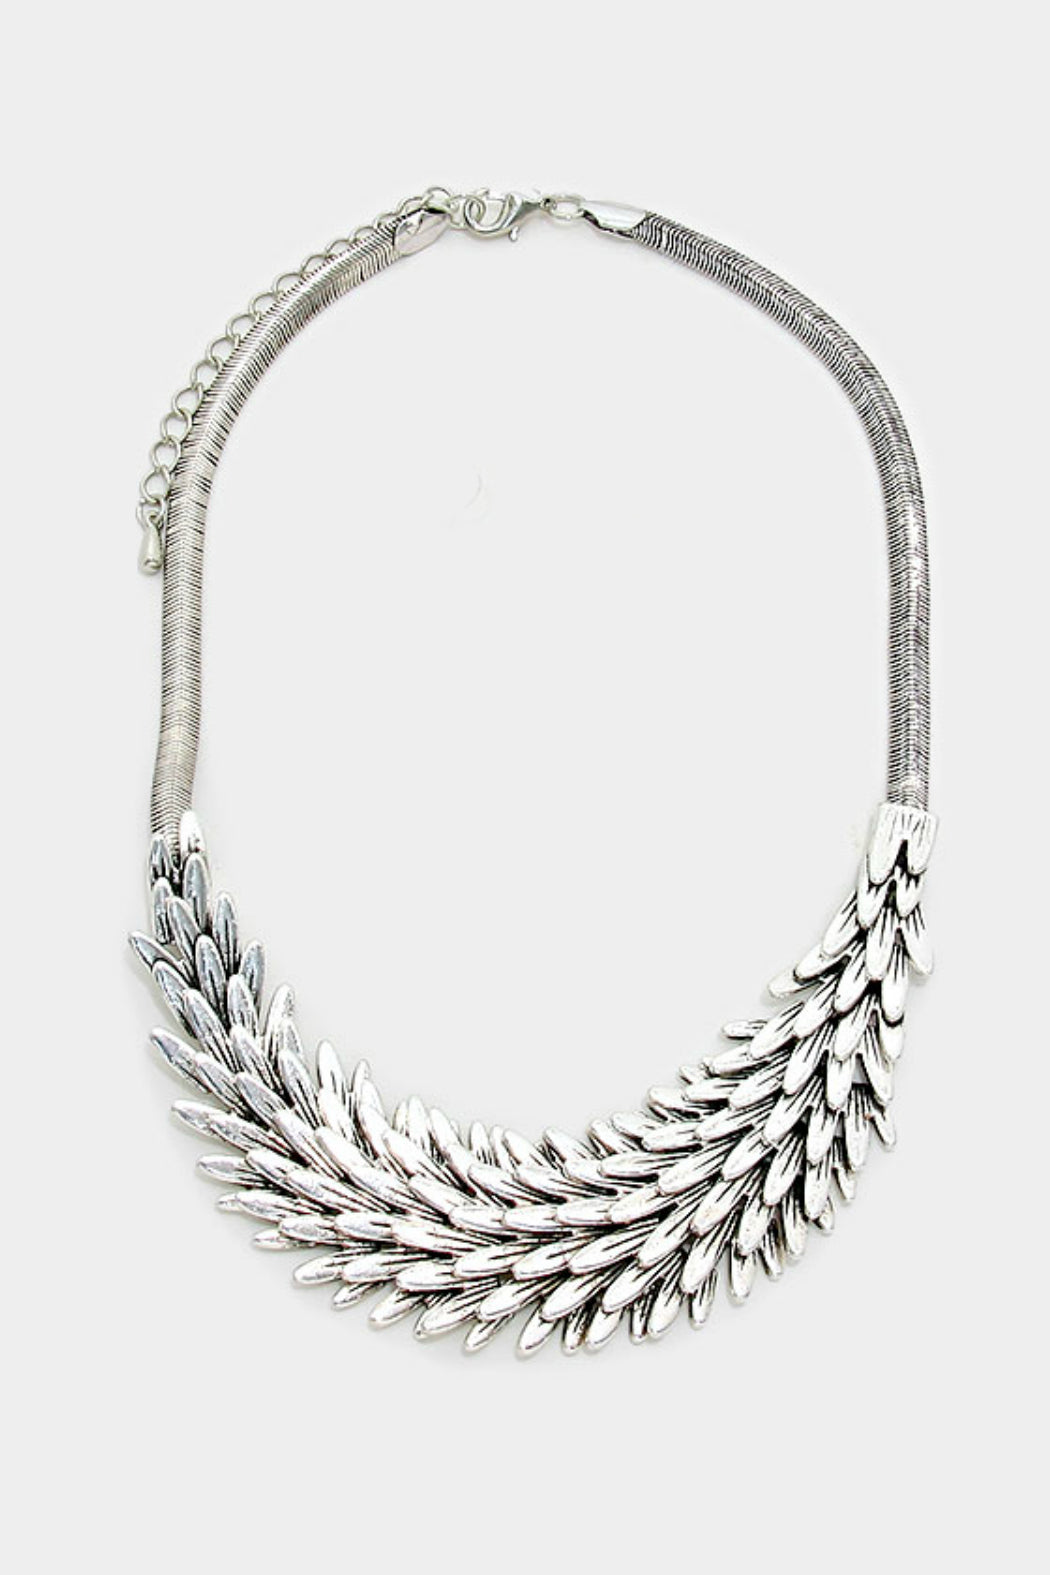 Antique Silver Feathered Necklace - Embellish Your Life 